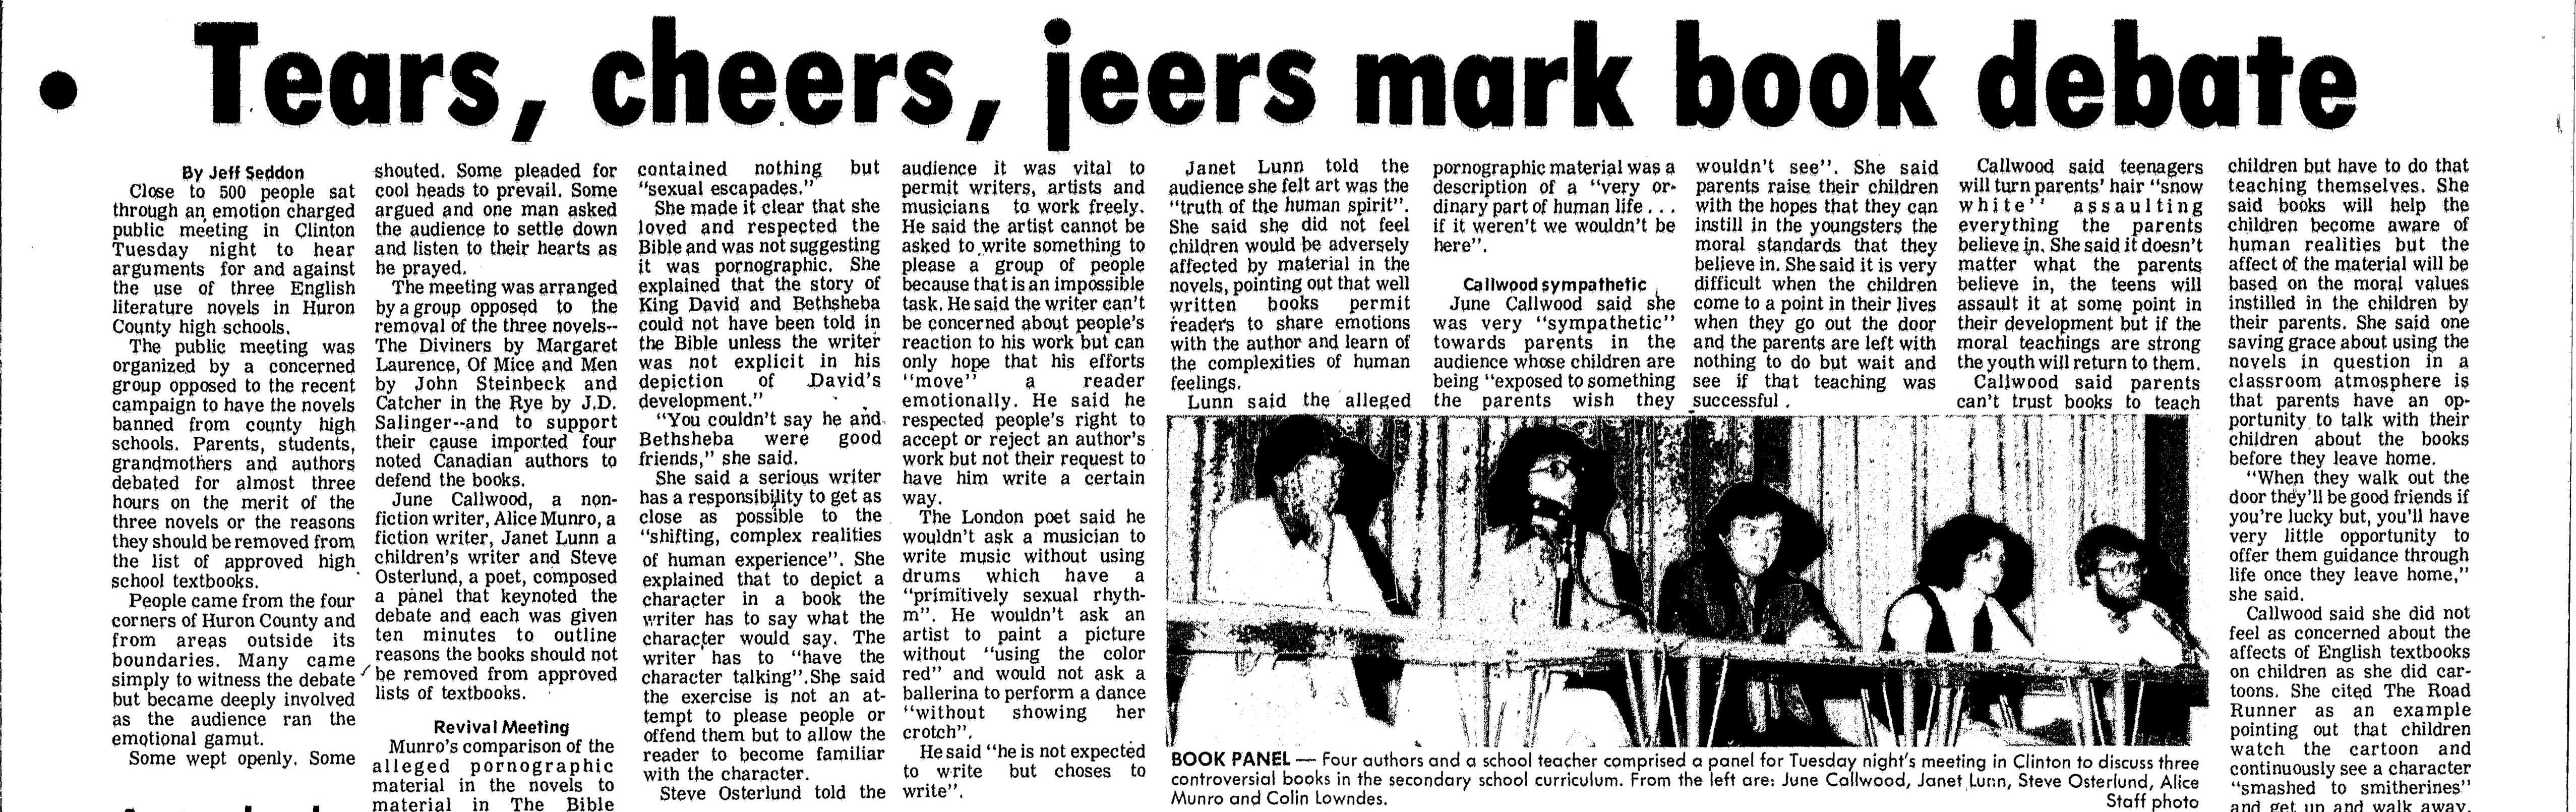 Newspaper clipping headlined "Tears, cheers, jeers mark book debate" Includes rectangular black and white photo in the bottom left with five figures sitting at a table.